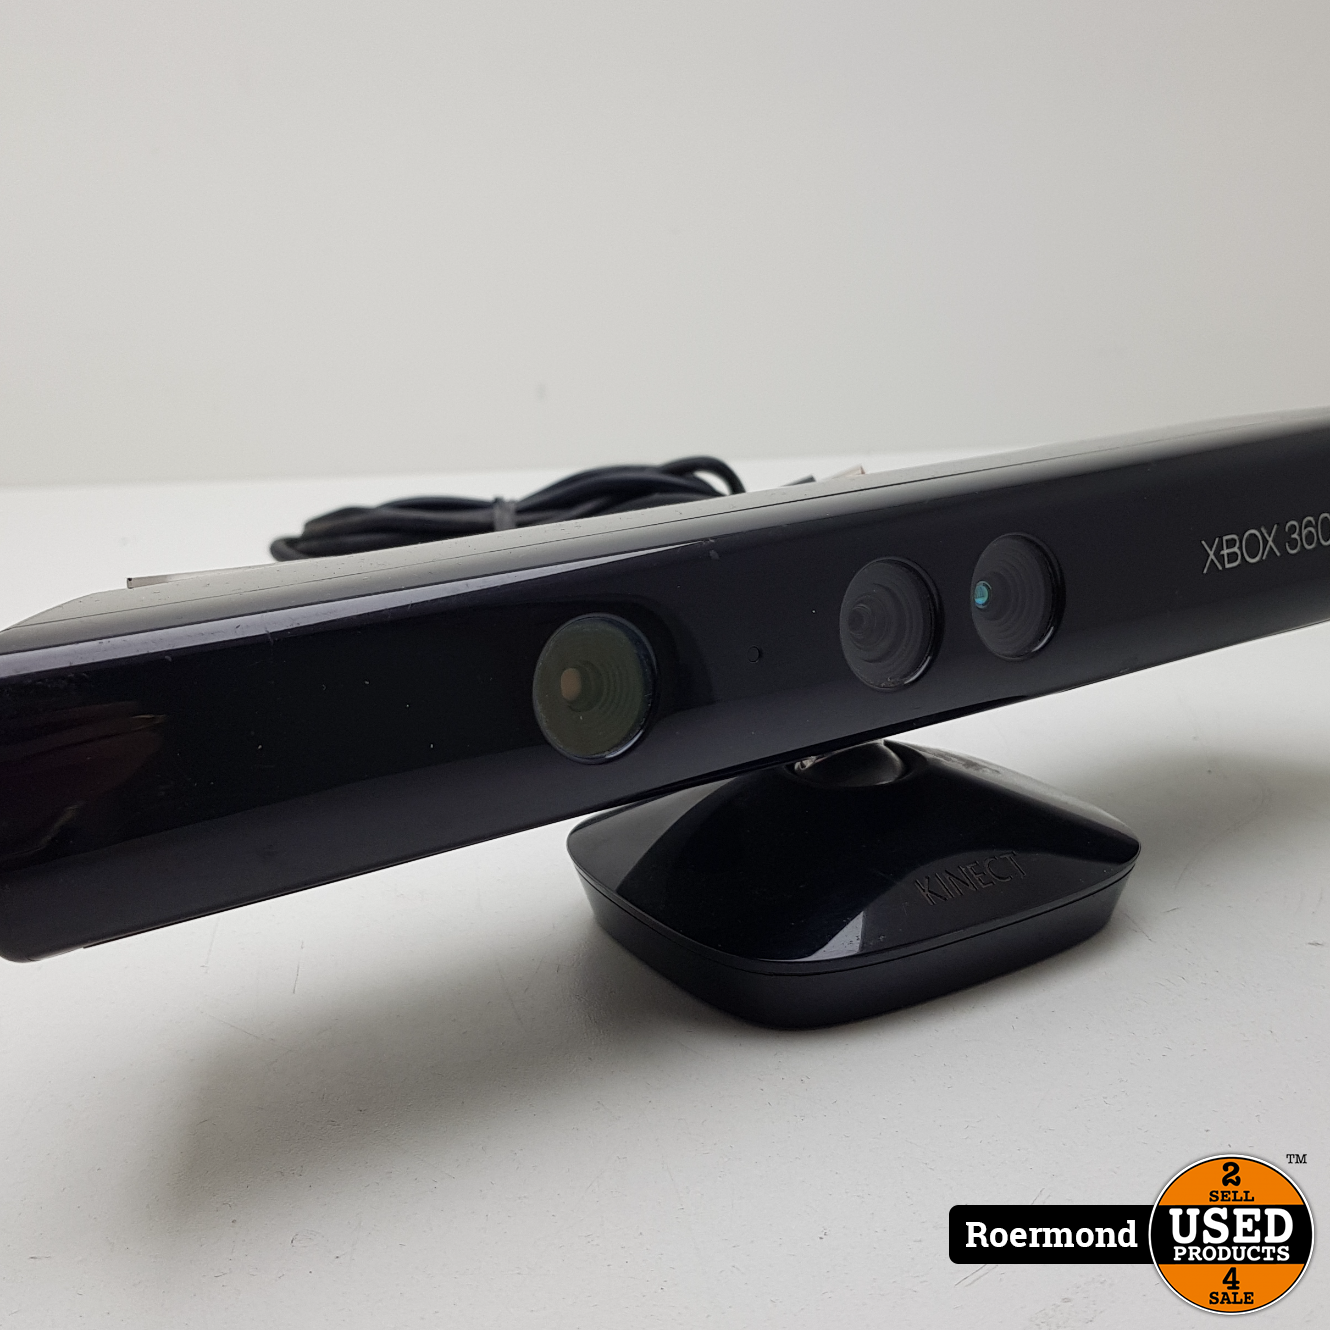 360 Kinect I - Used Roermond